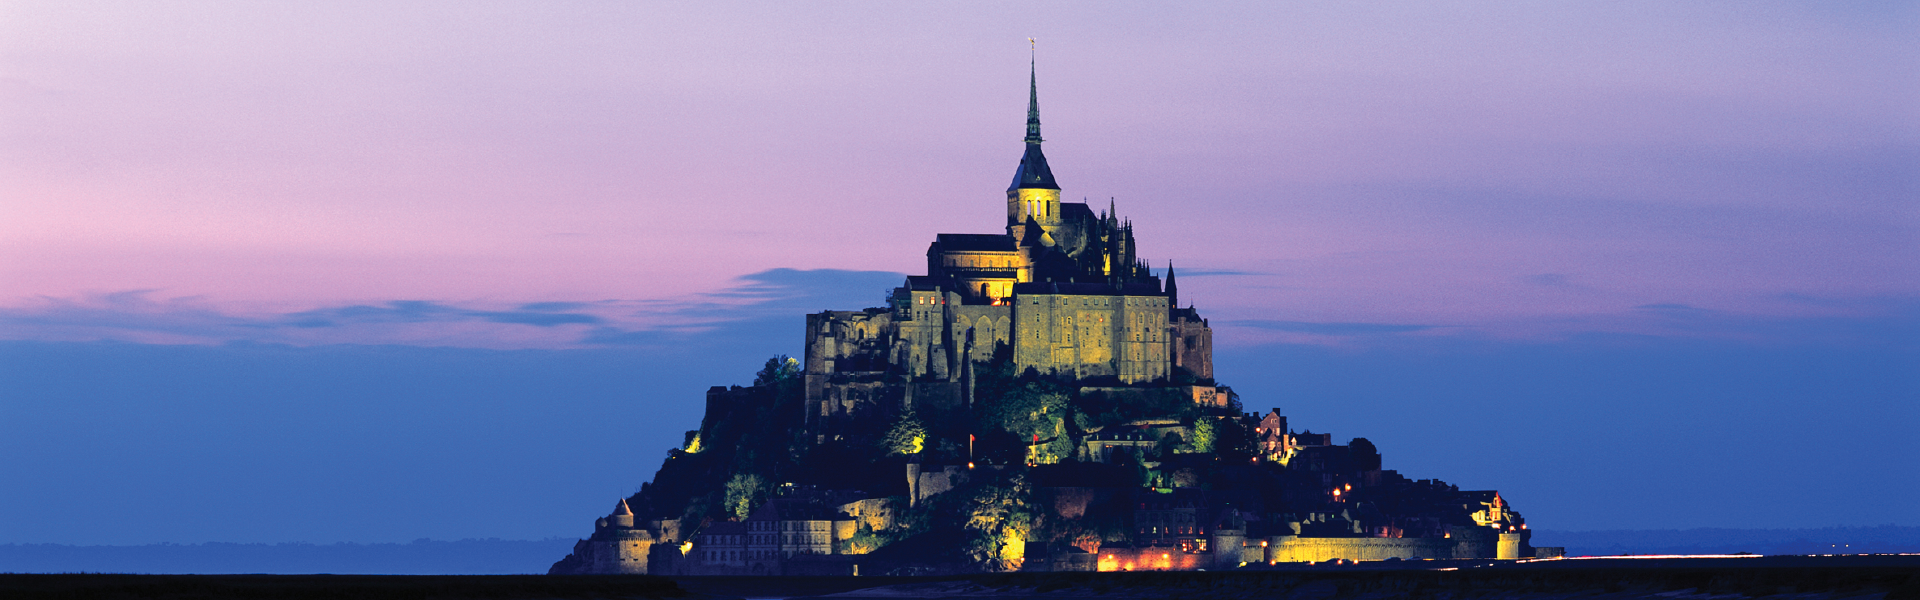 A photo of the Mont Saint Michel Abbey at sunset